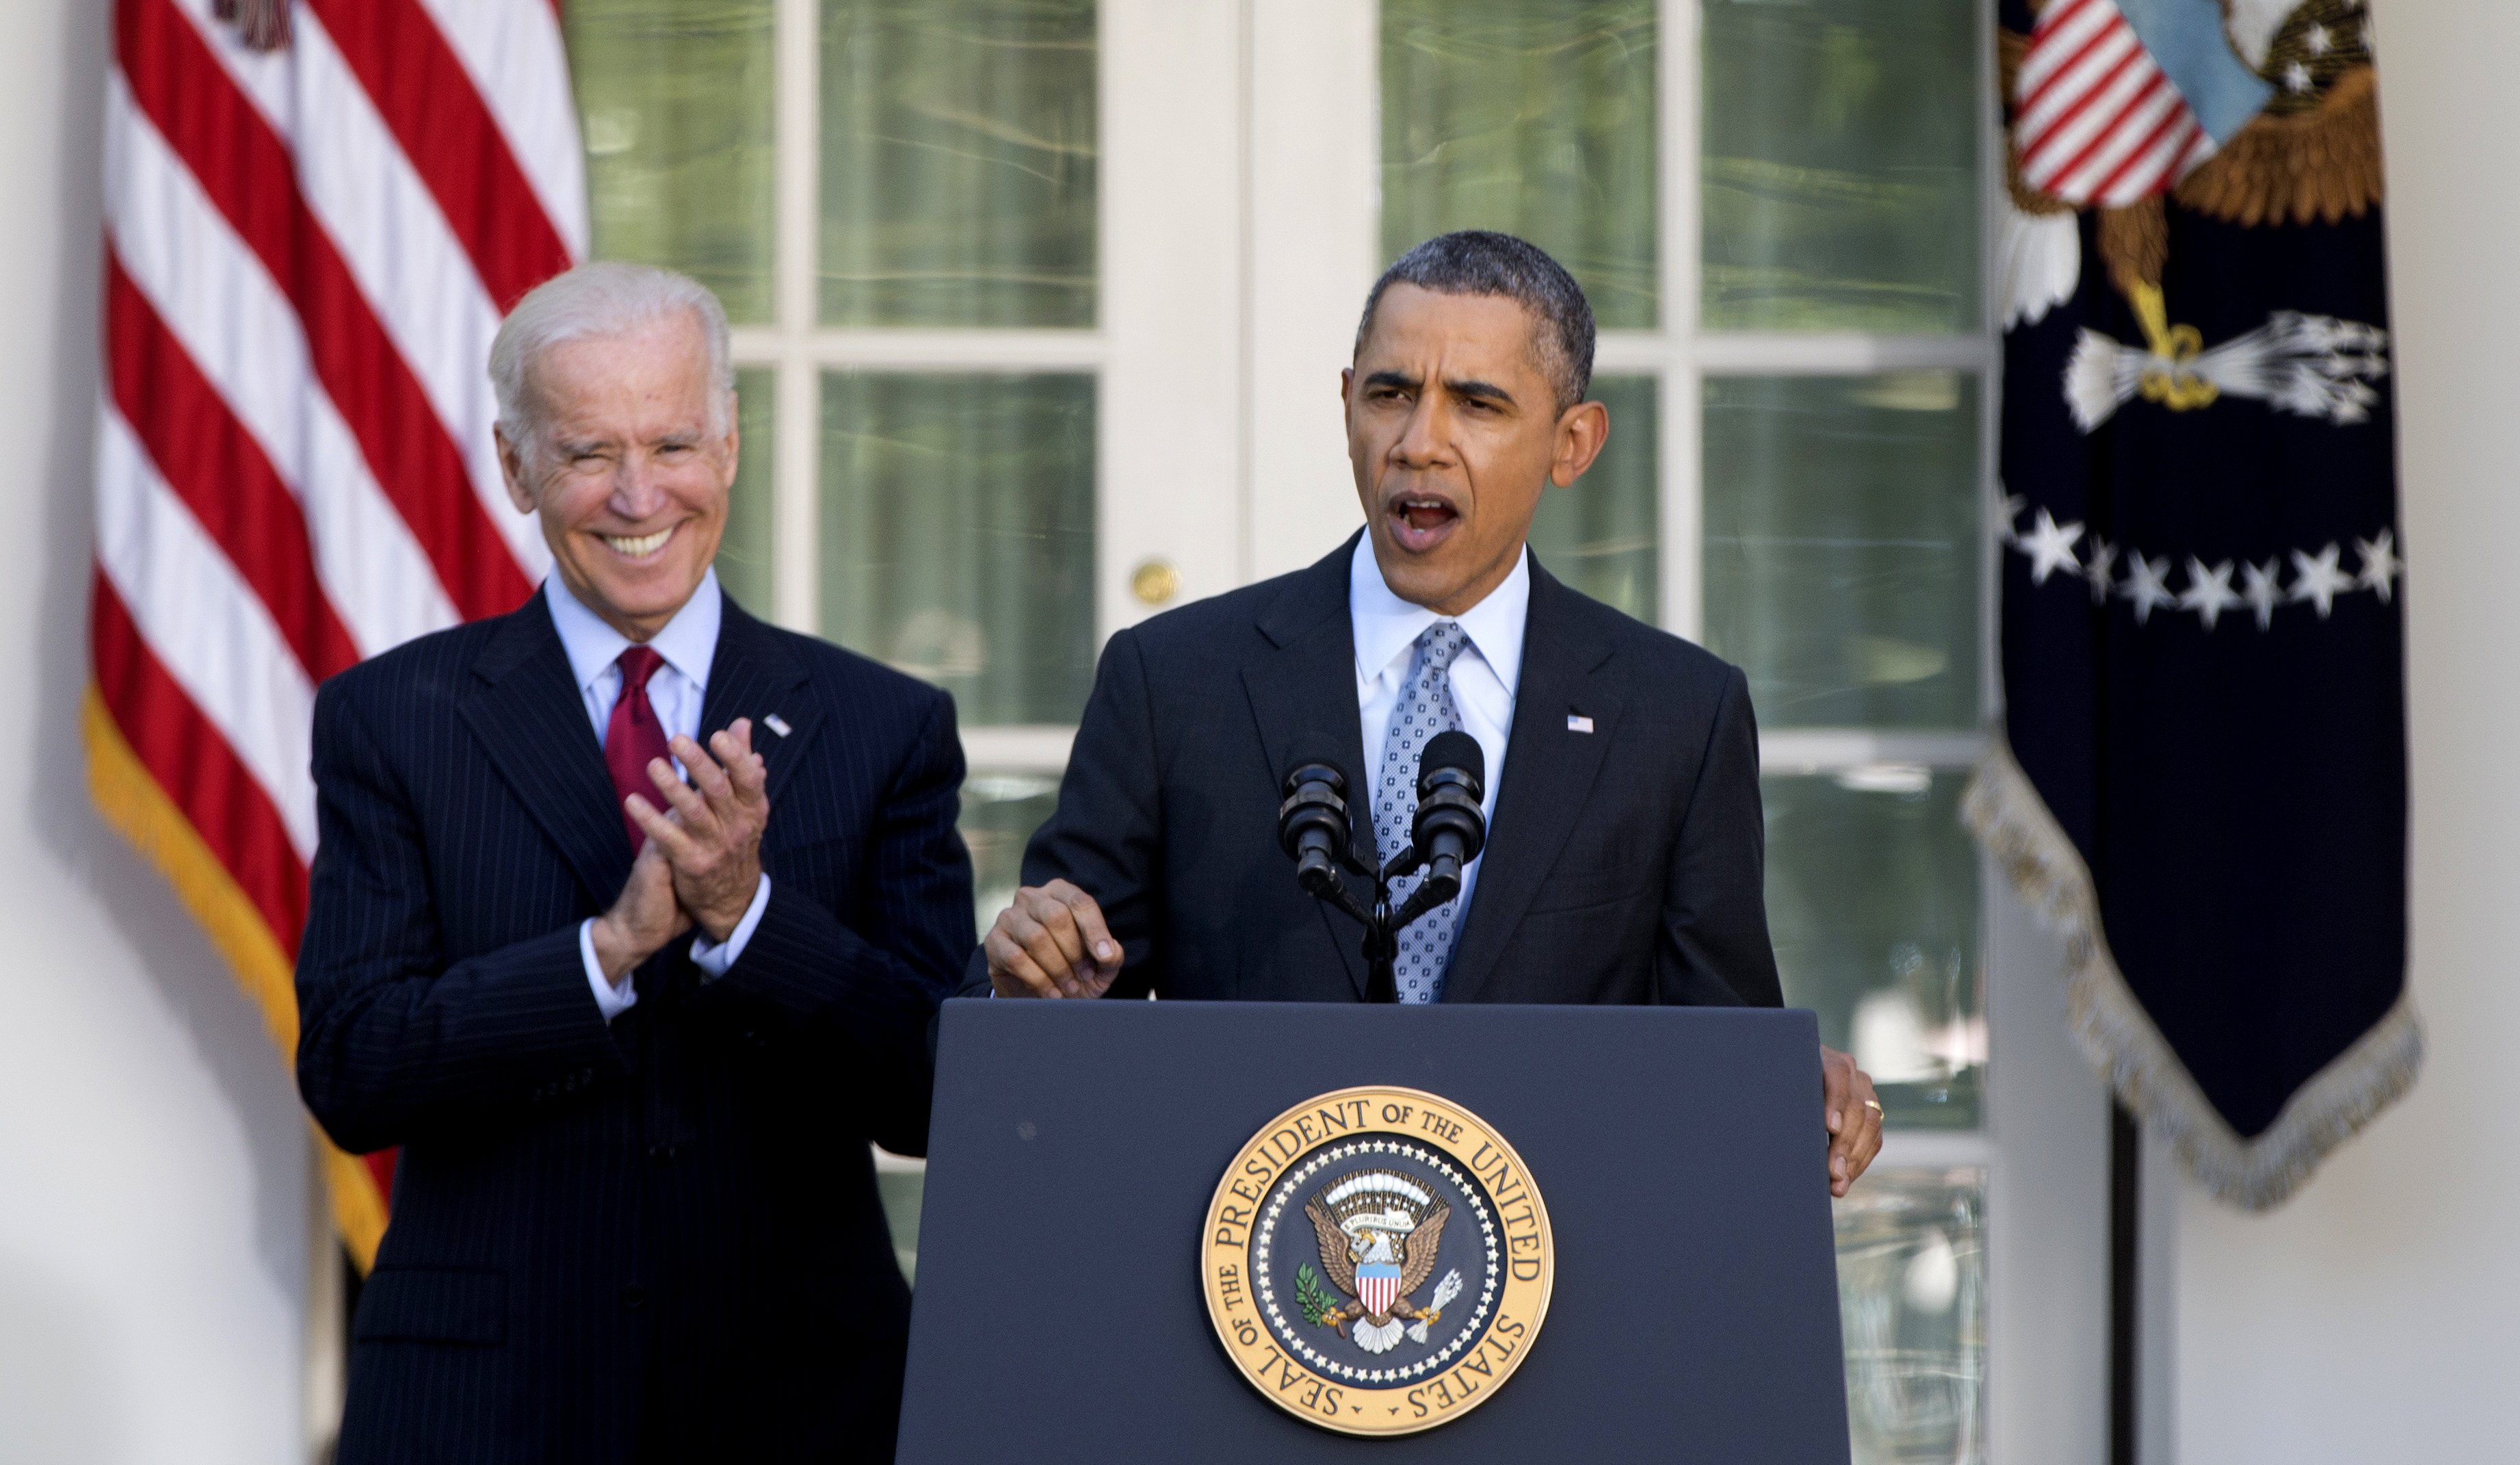 President Barack Obama, with Vice President Joe Biden, speaks in the Rose Garden of the White House in Washington, Tuesday, April 1, 2014, about the Affordable Care Act. (Carolyn Kaster—AP)